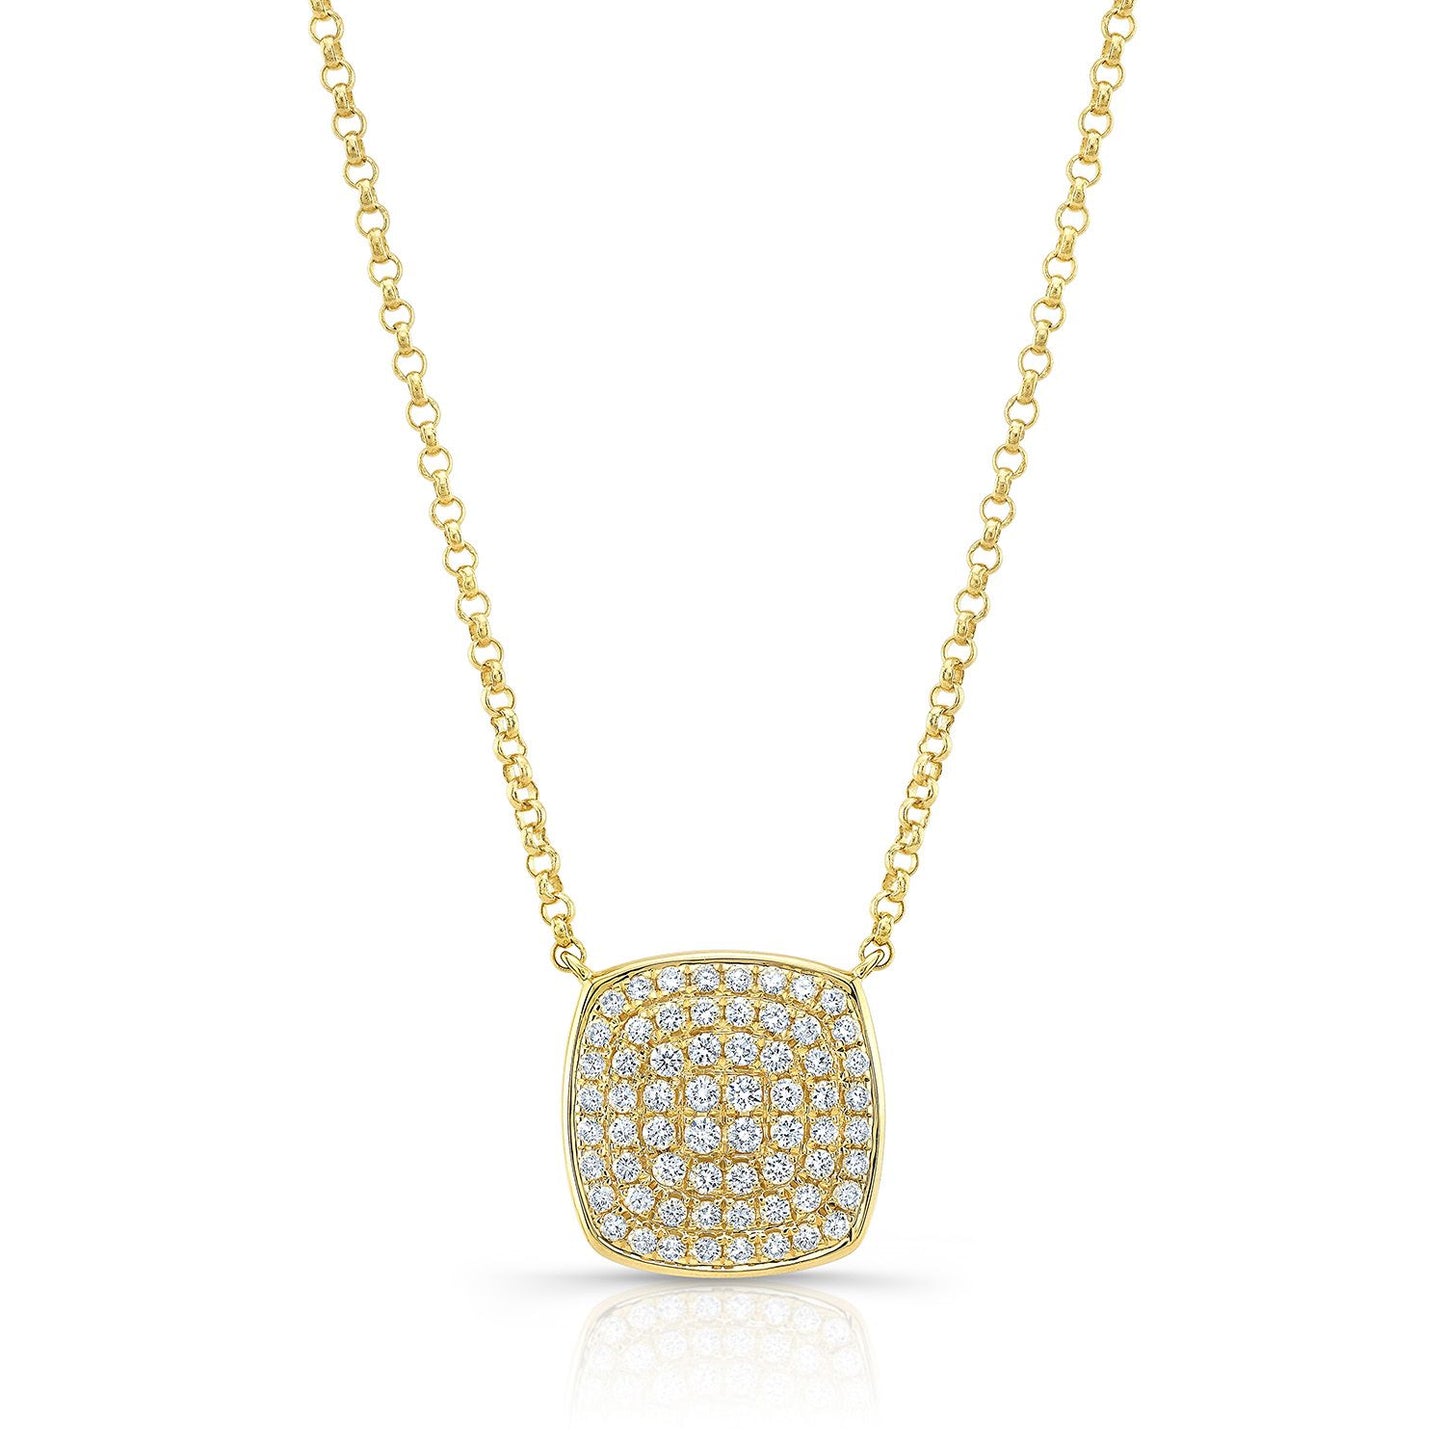 Diamond Pave Rounded Square Disk Necklace In 14k Yellow Gold, 18 Inch